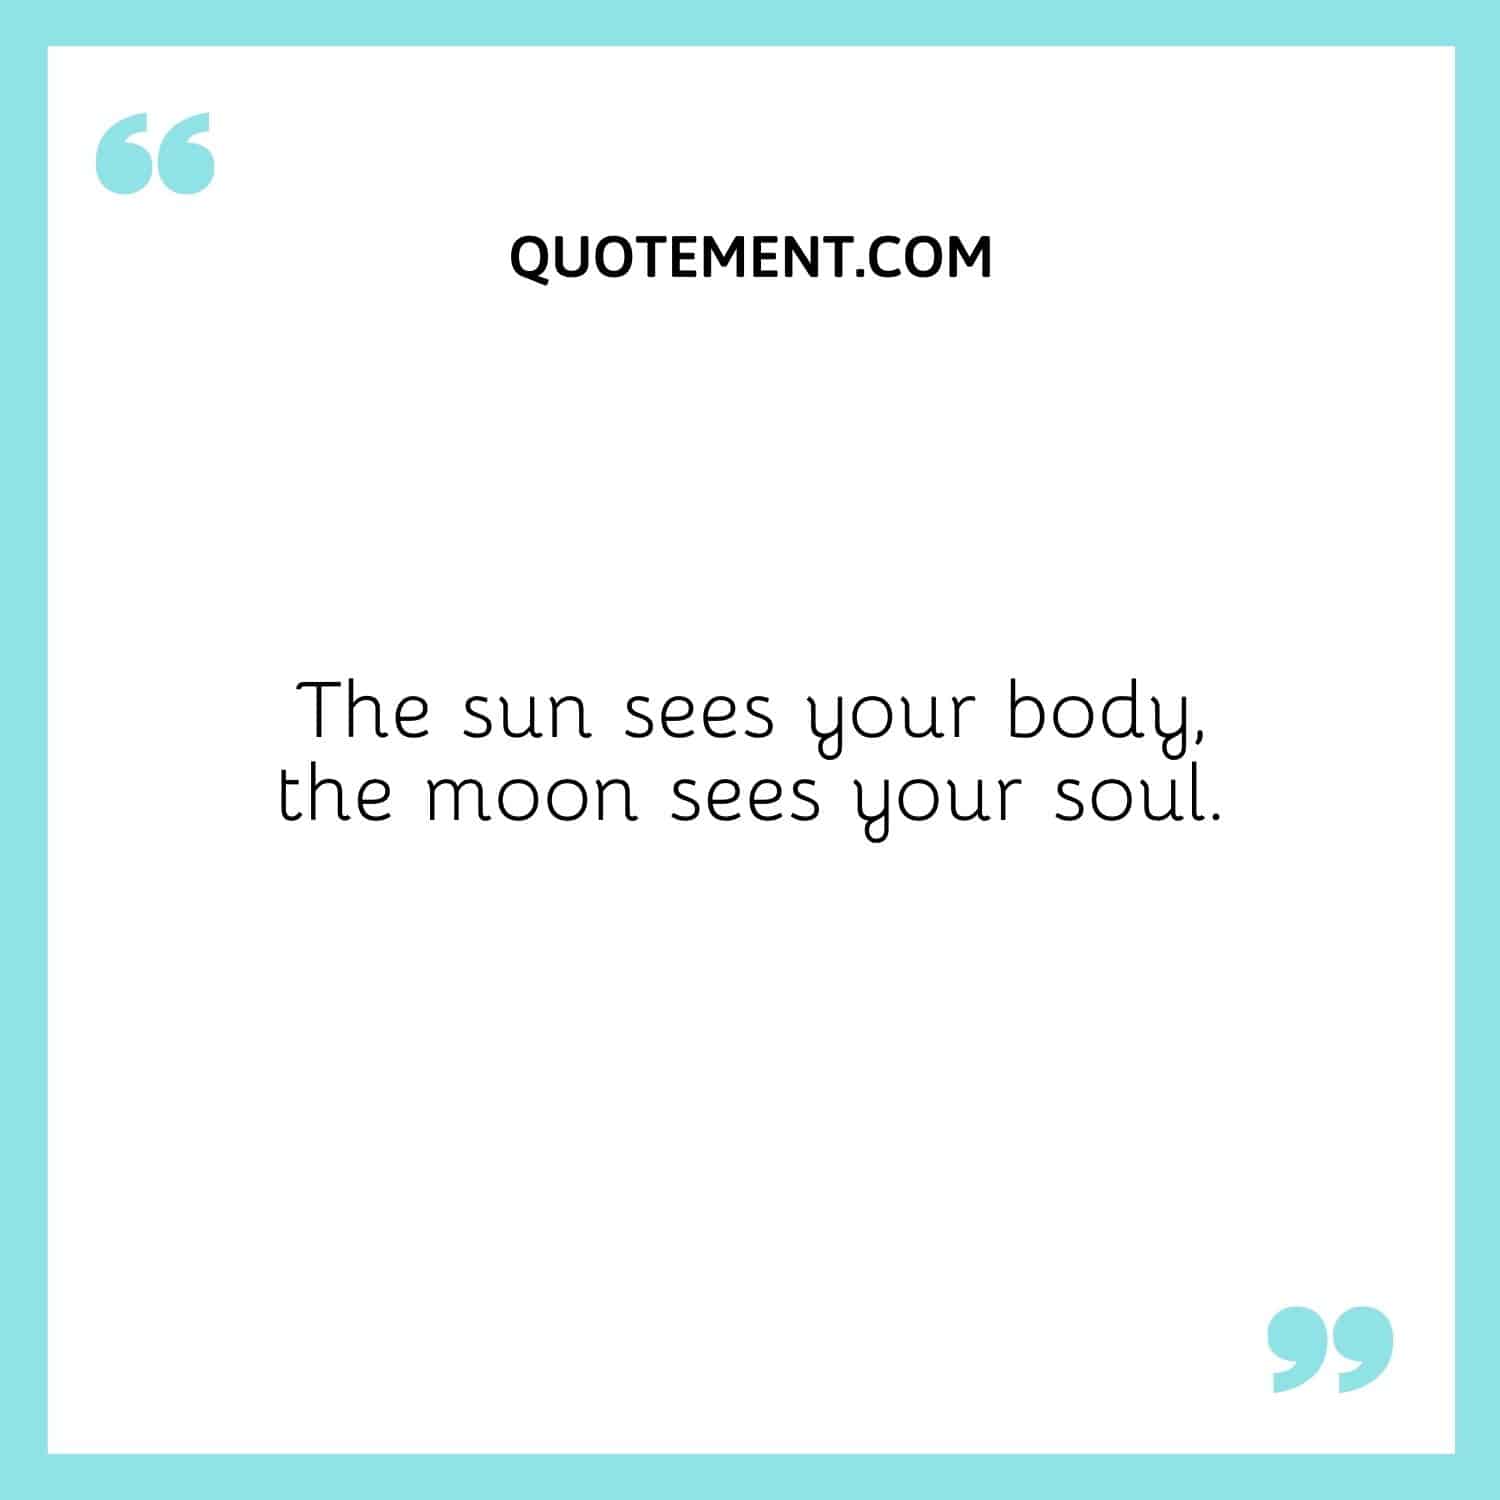 The sun sees your body, the moon sees your soul.